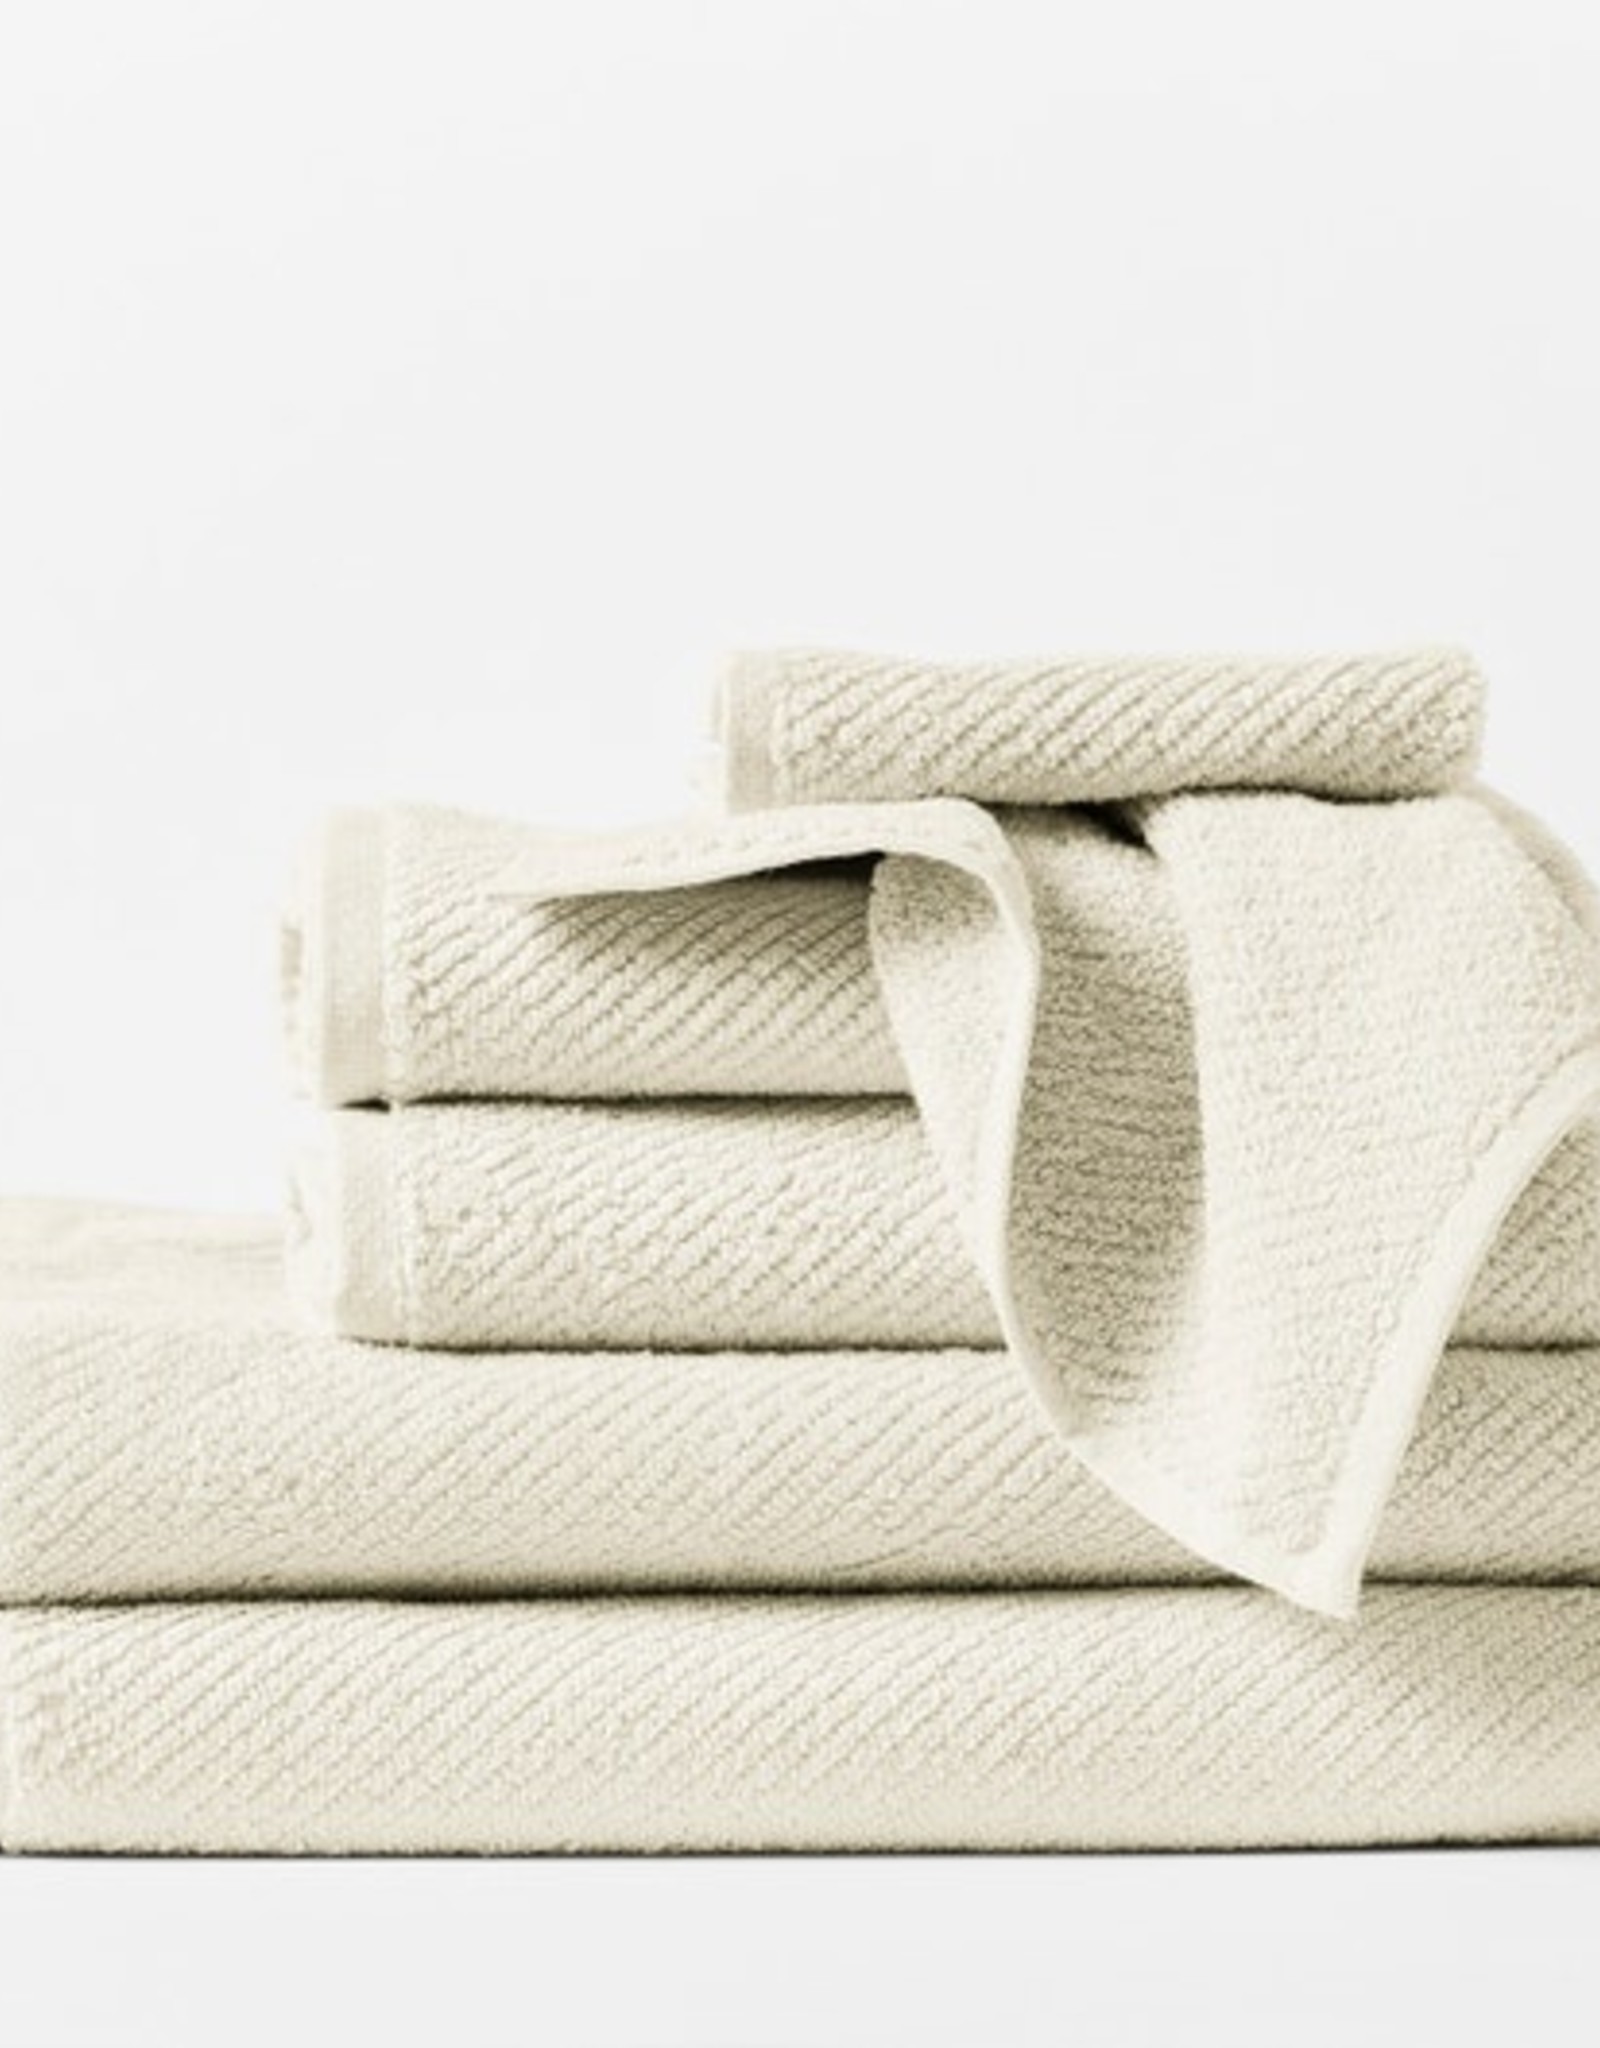 Air Weight Towels - Undyed